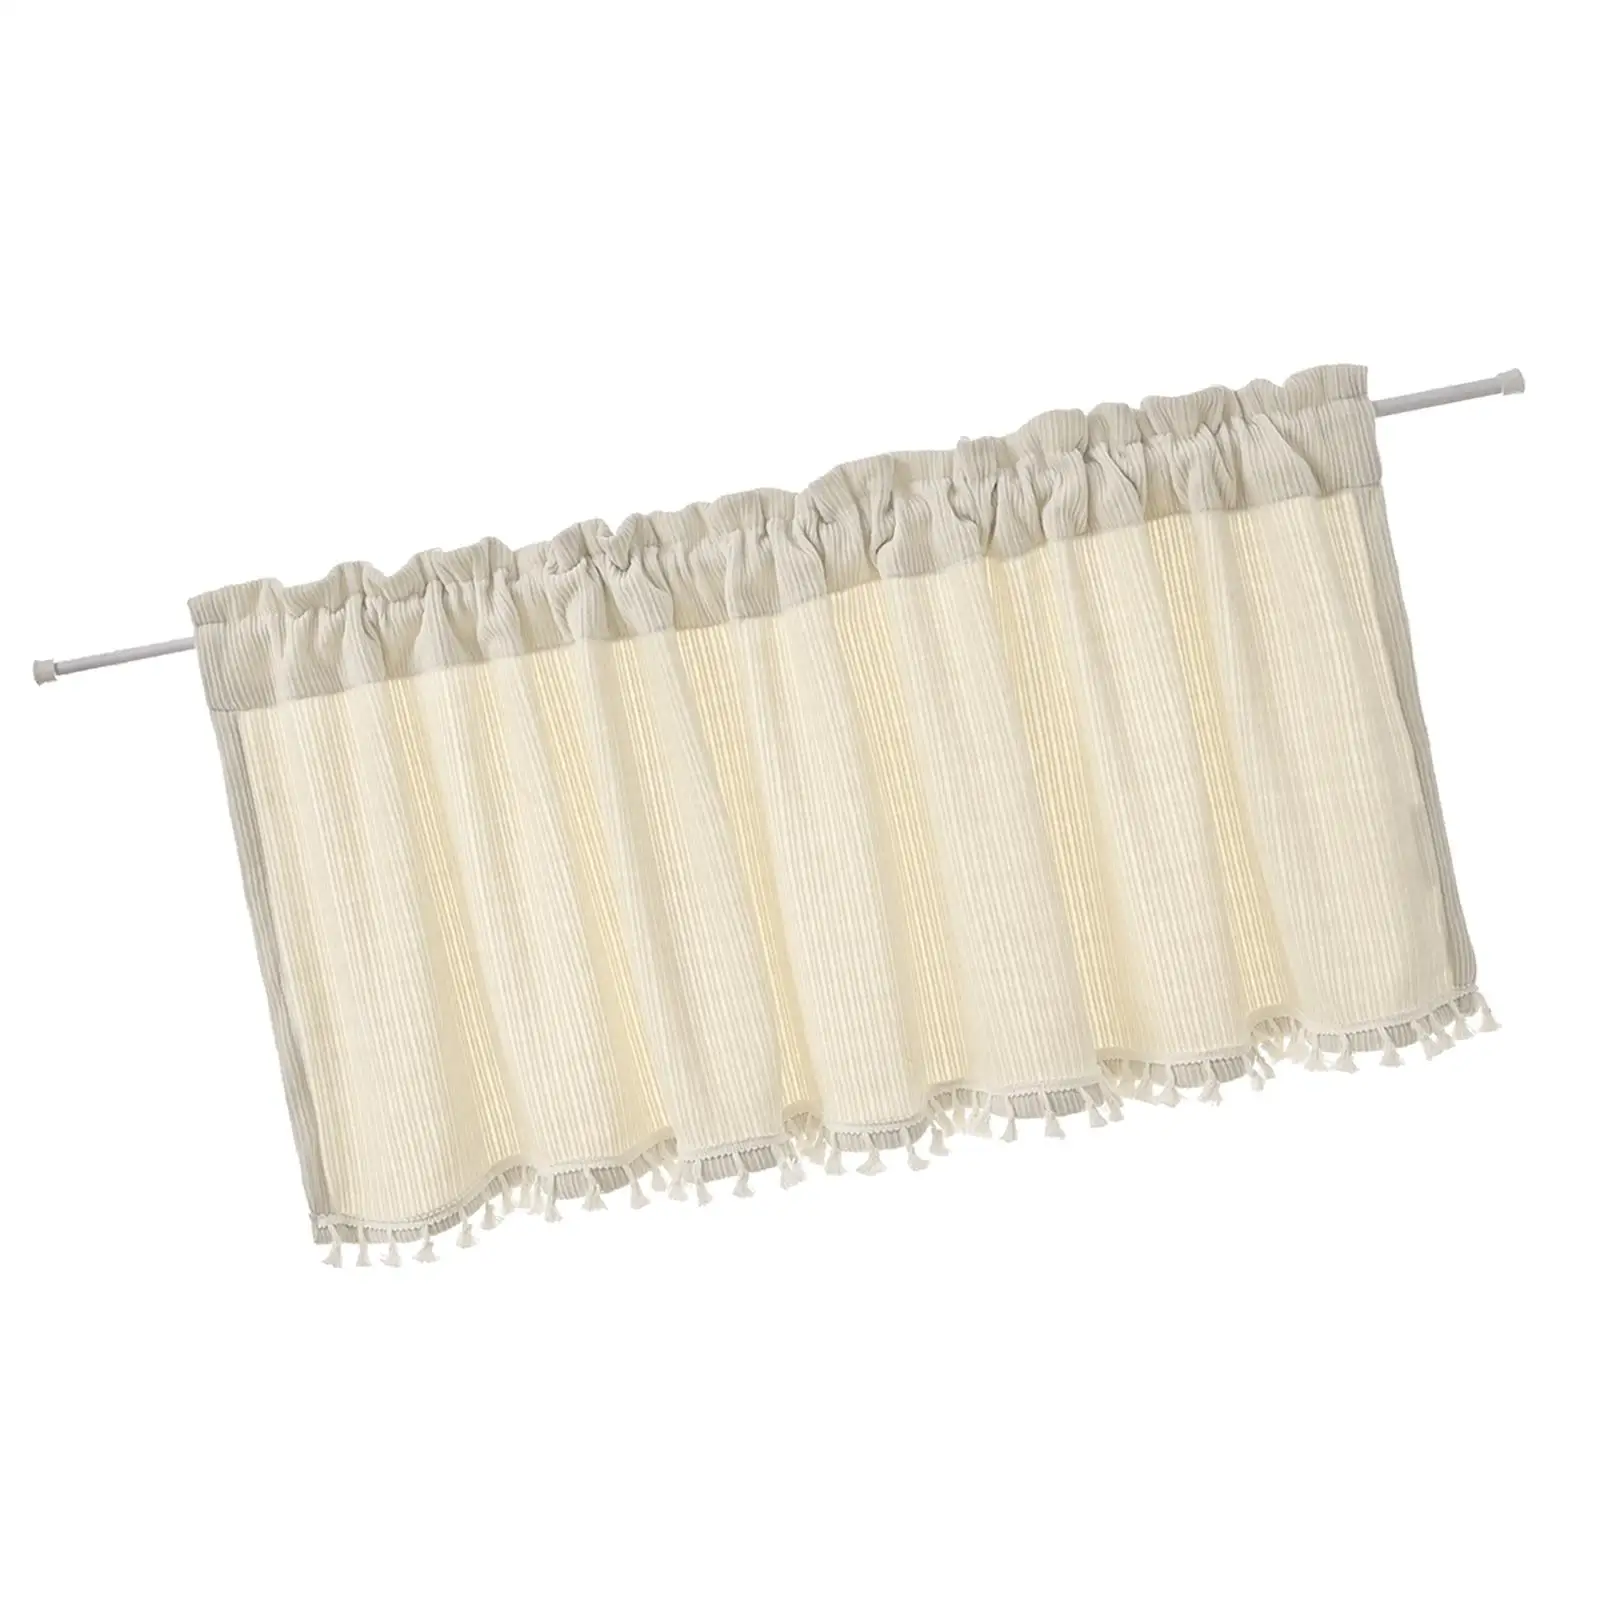 Window Curtain, Covering Shade, Blackout Drapes, Window Treatment for Living Room Kitchen Farmhouse Bathroom Decoration